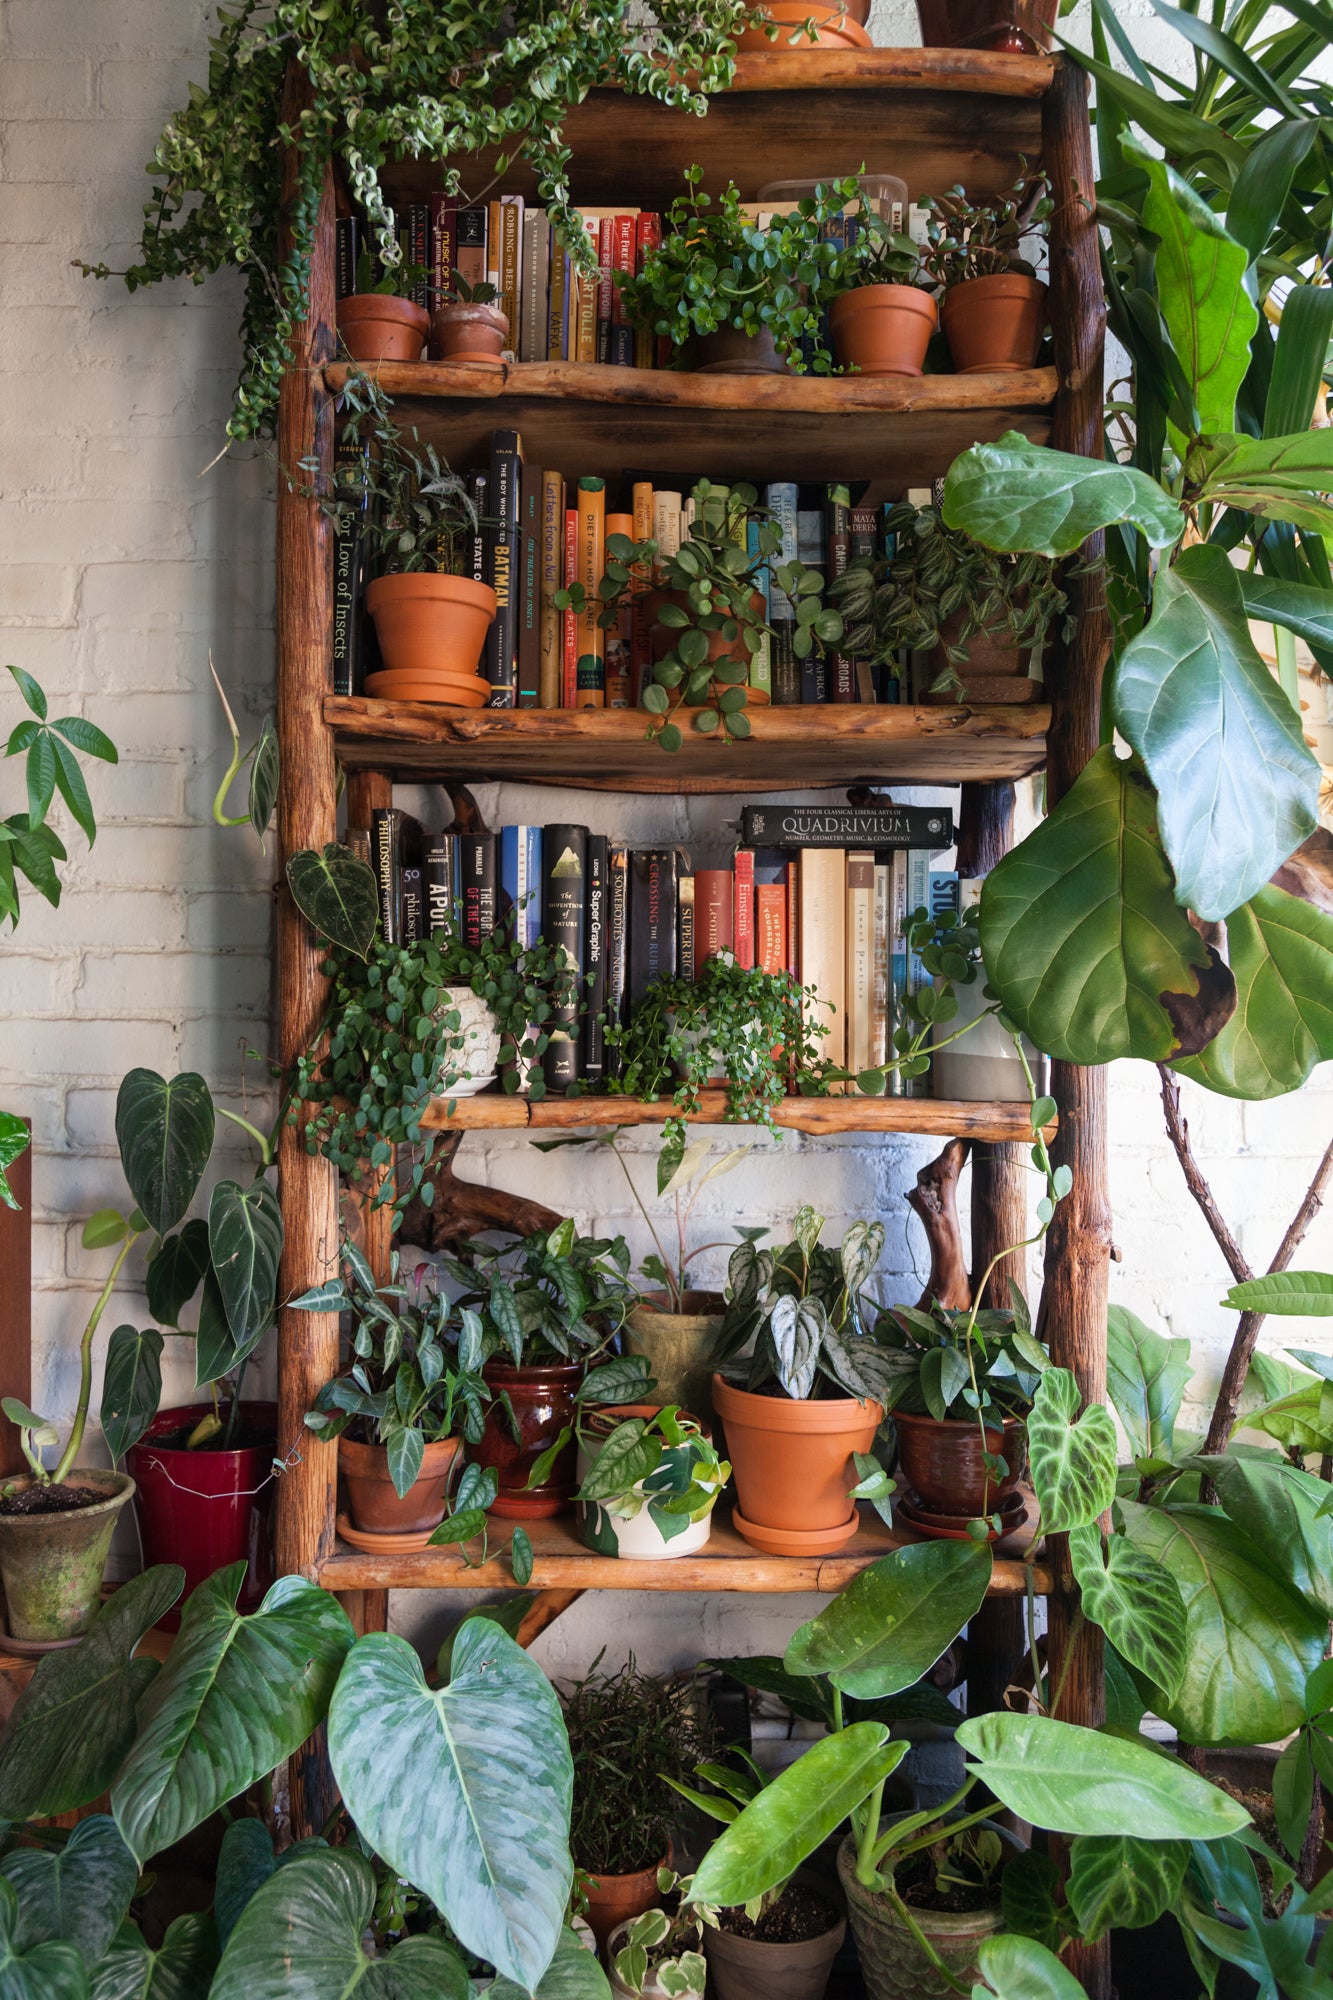 Shelves with plants